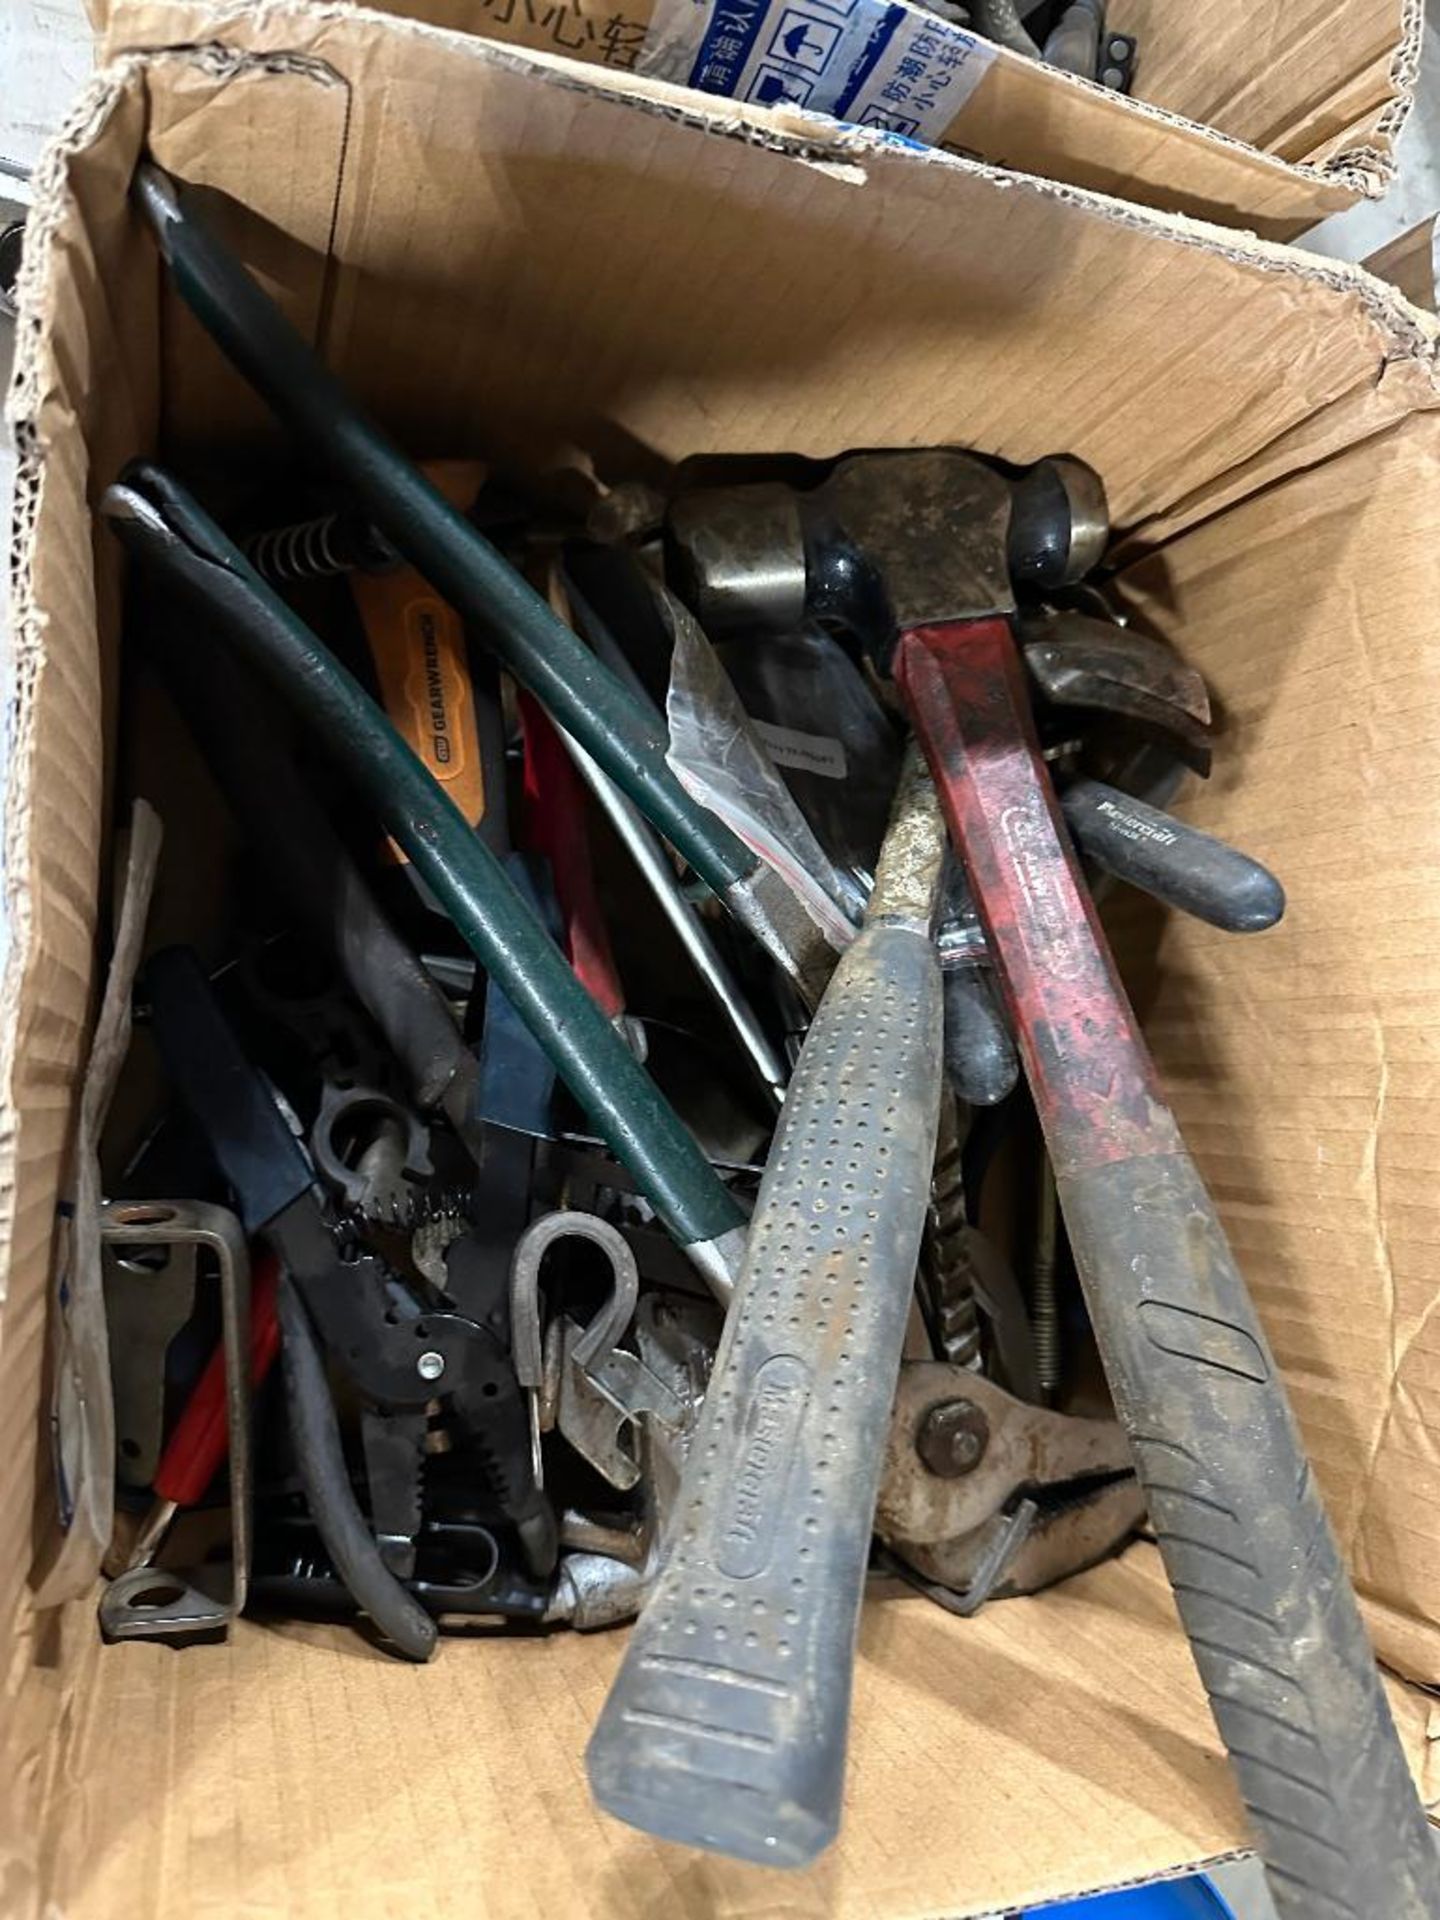 Lot of Asst. Hammers, Pliers, Wire Strippers, etc. - Image 5 of 5